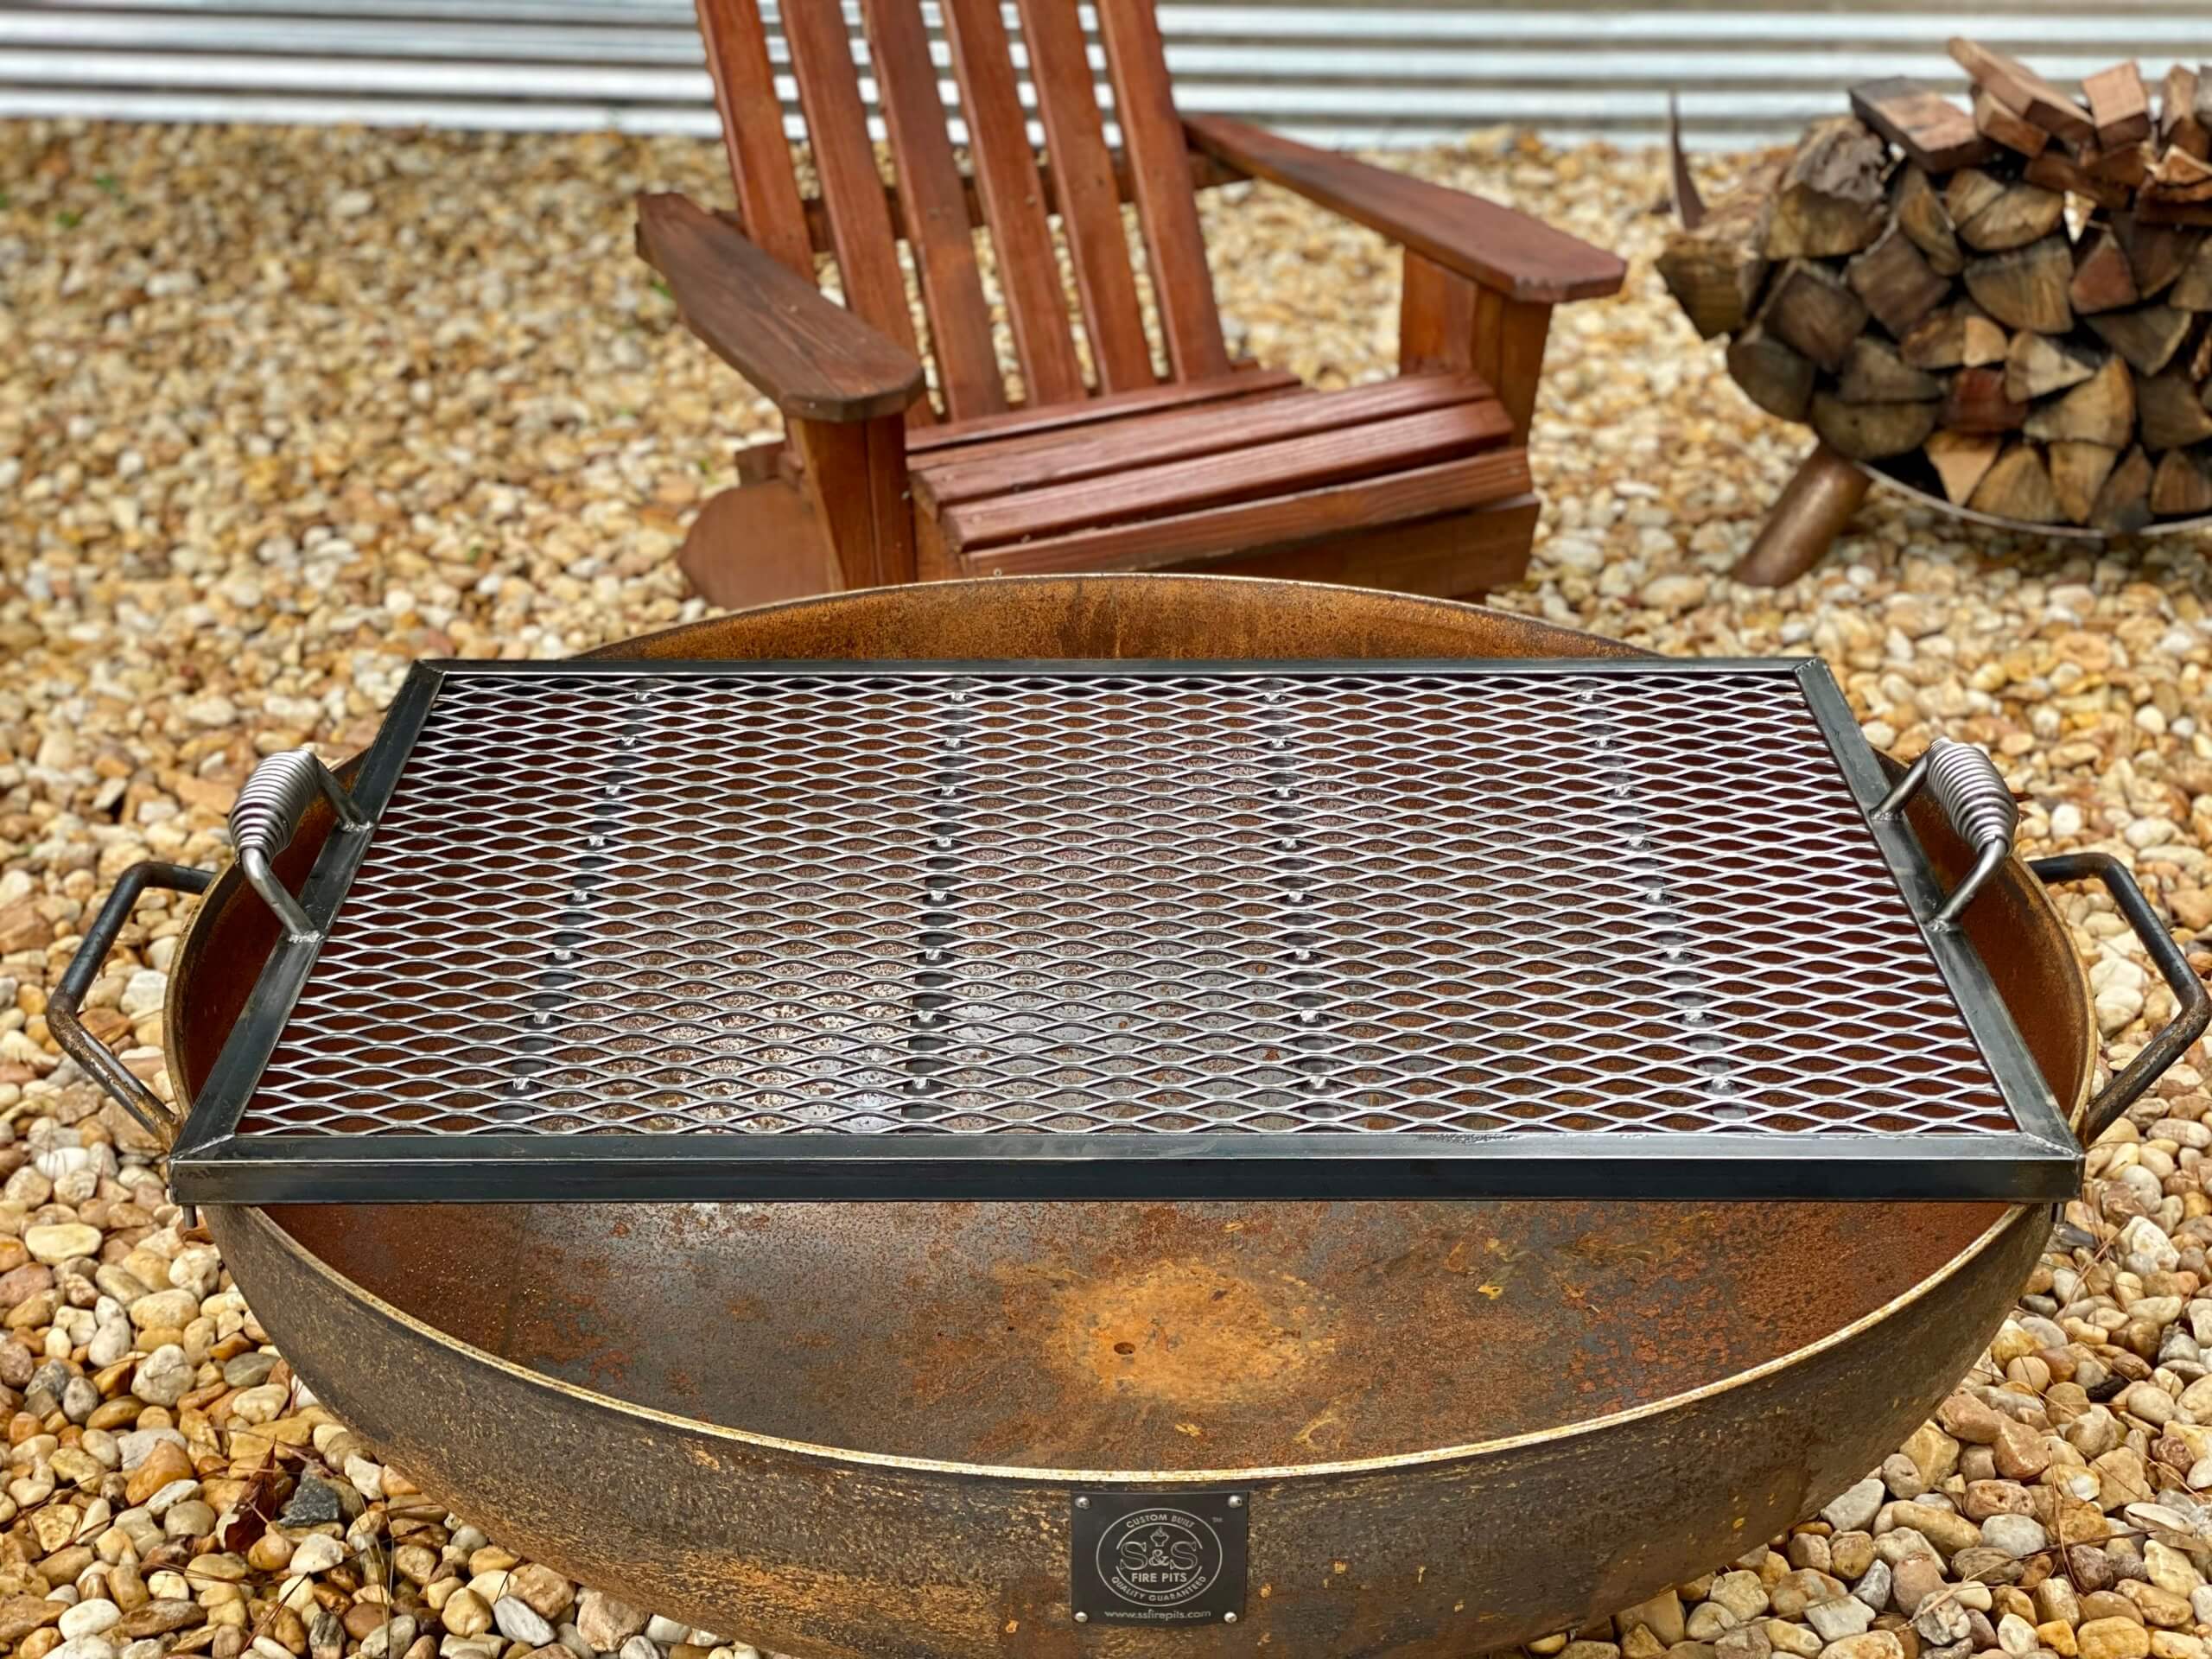 42 Heavy Duty Handcrafted Fire Pit, Heavy Cast Iron Fire Pit